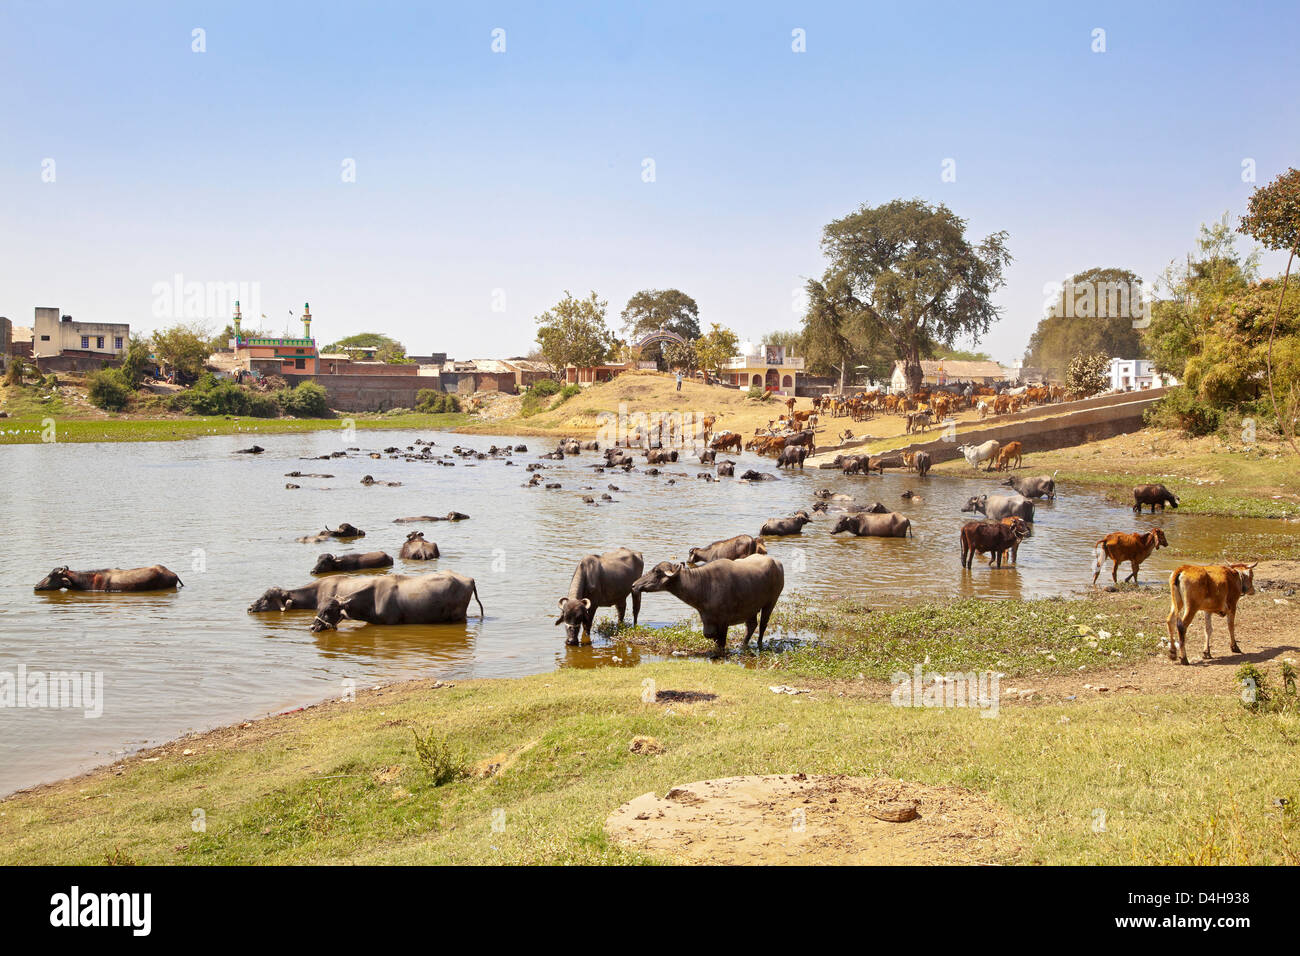 Gujarat village in rural countryside of India of cattle coming to water and bathe, cool down from the baking hot sun Stock Photo